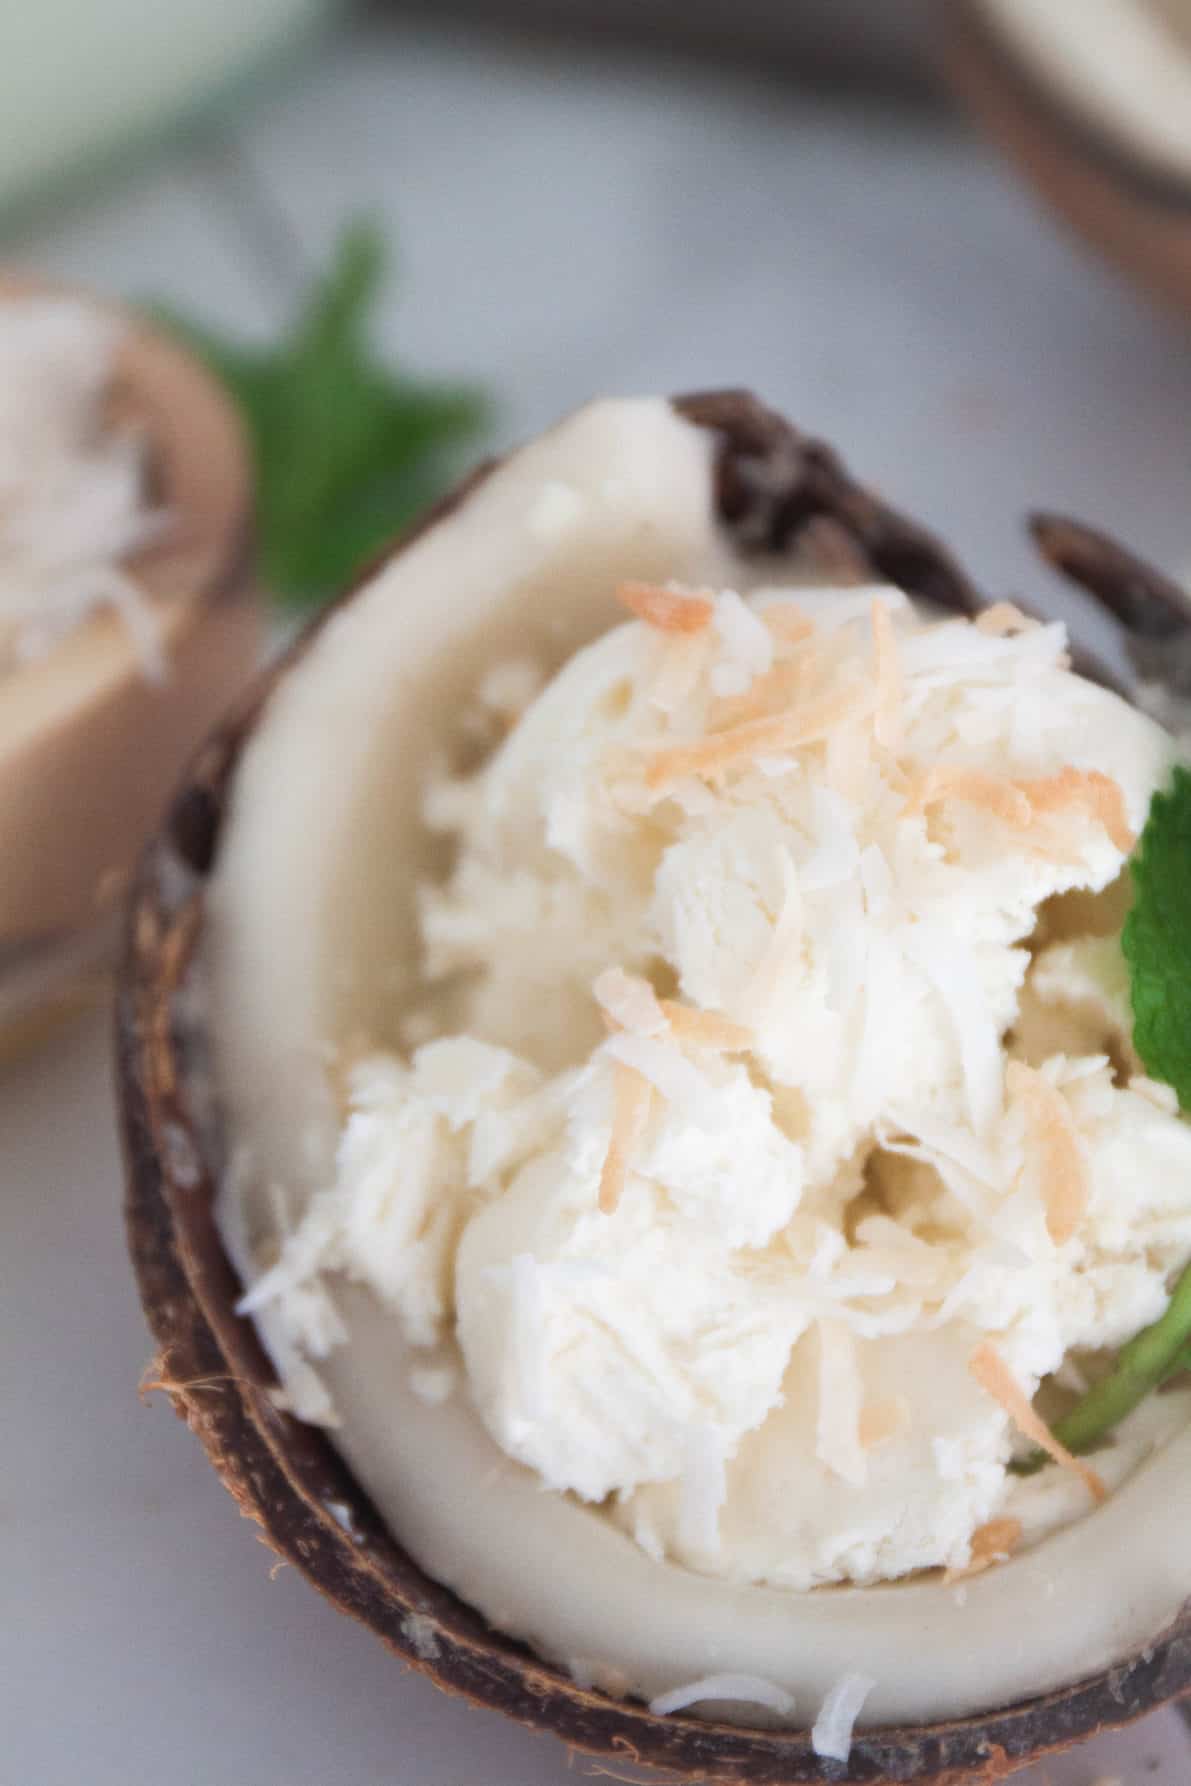 No Churn Creamy Coconut Ice Cream - Sweet, creamy, coconutty. This no churn coconut ice cream is simply delightful and is a cinch to make. And you don't even need to have an ice cream maker! | wanderzestblog.com